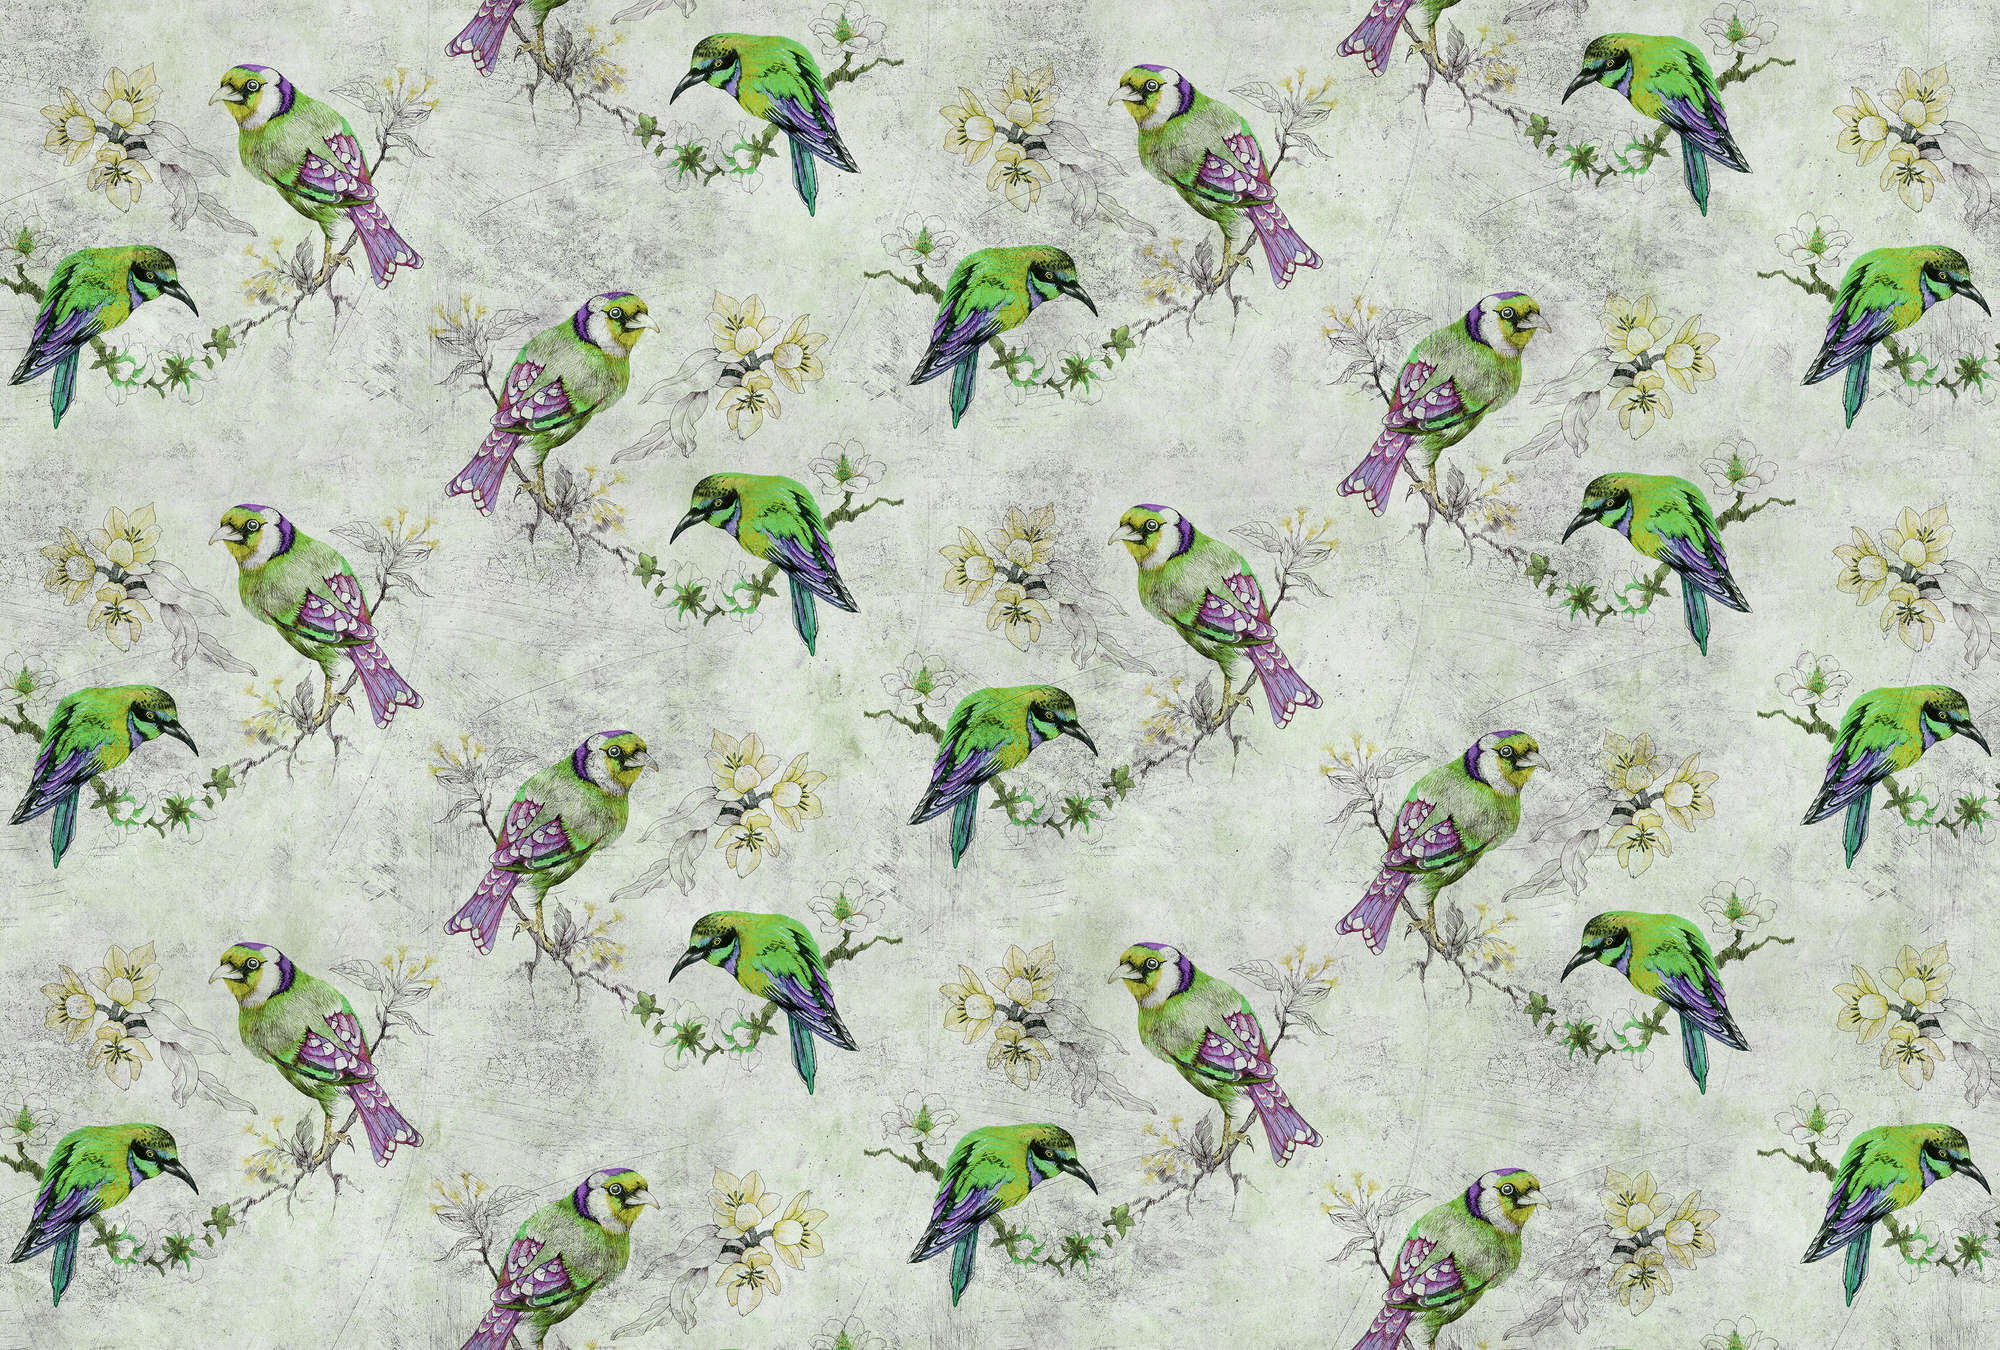             Love birds 2 - Colourful photo wallpaper in scratchy structure with sketched birds - Grey, Green | Premium smooth fleece
        